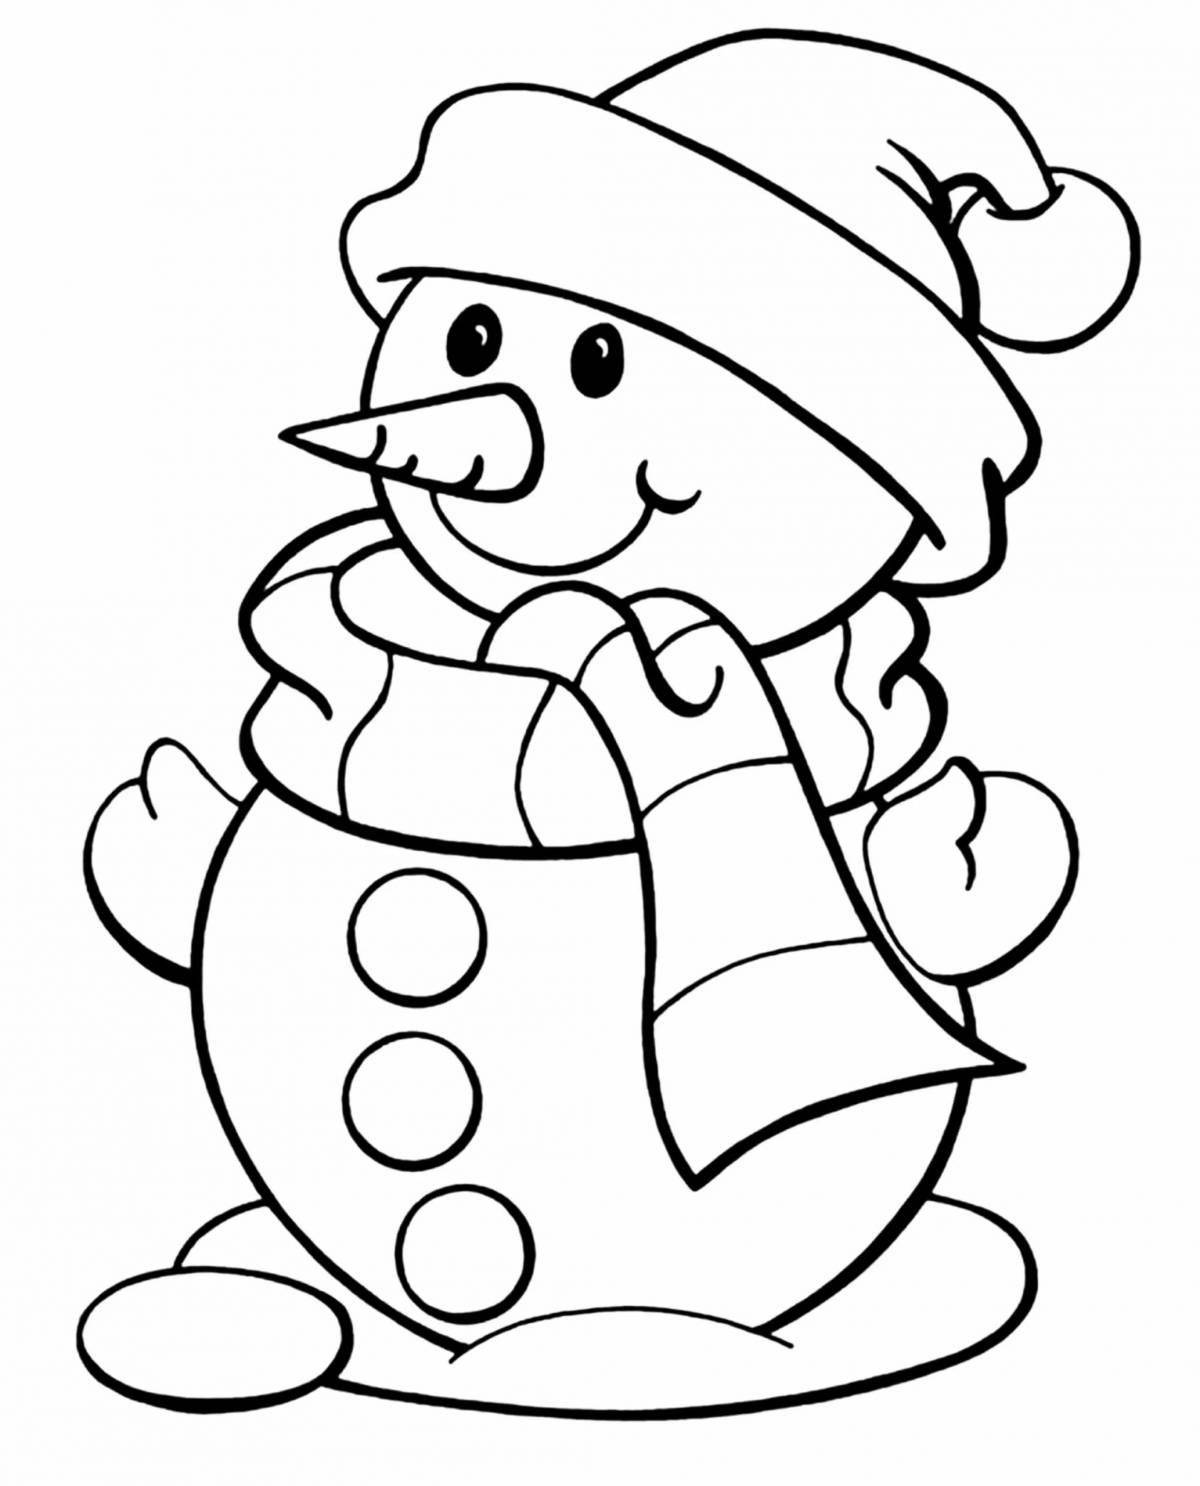 Whimsical Christmas coloring book for kids